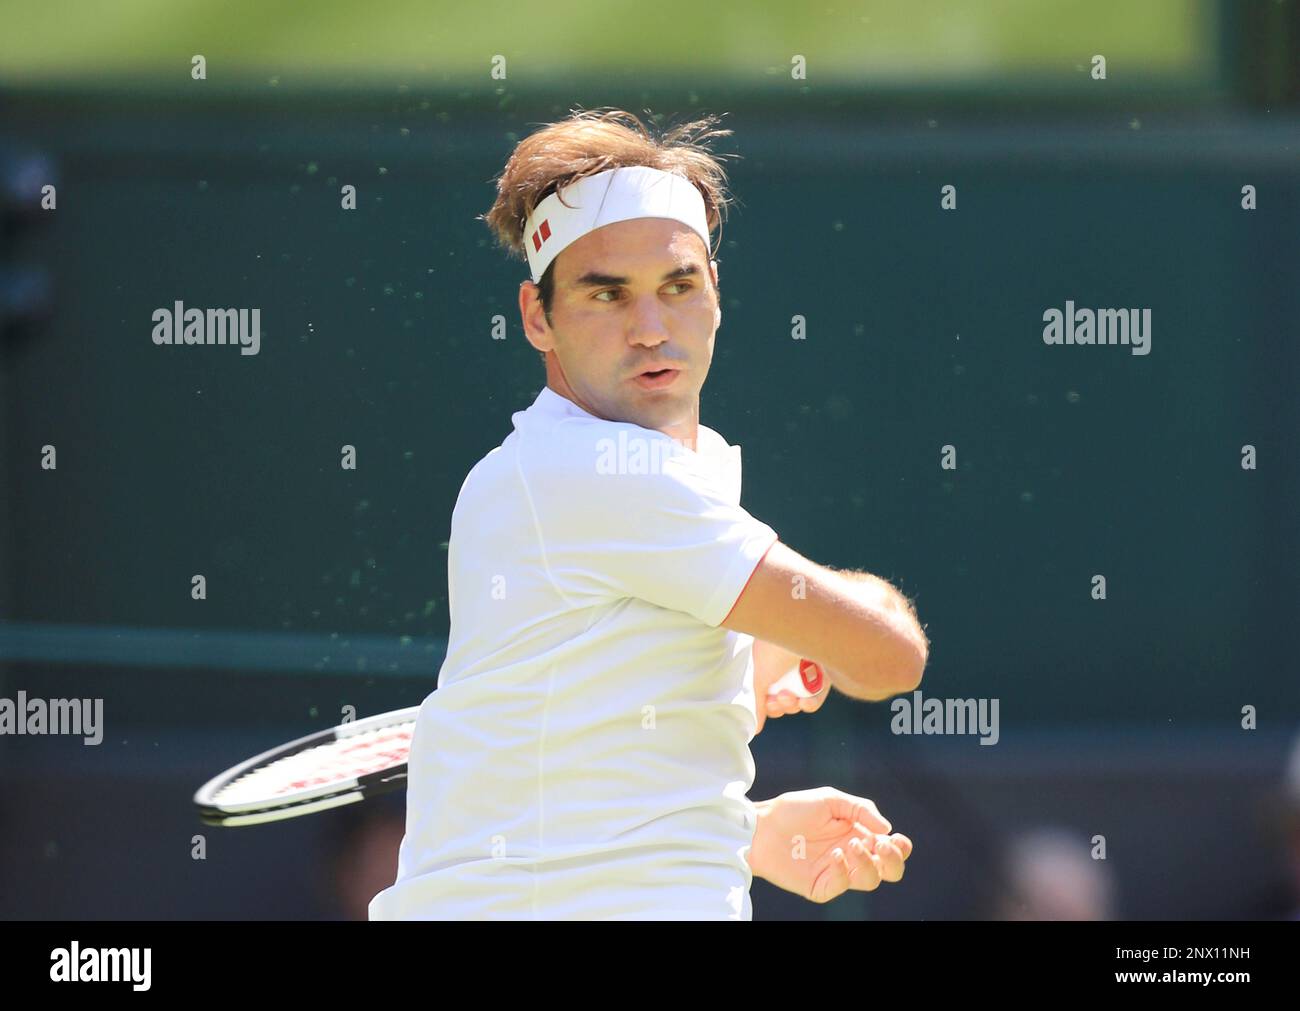 Roger Federer of Switzerland hits a ball during the gentlemens singles first round of the Wimbledon tennis tournament against Dusan Lajovic of Serbia at All England Tennis Club in London on July